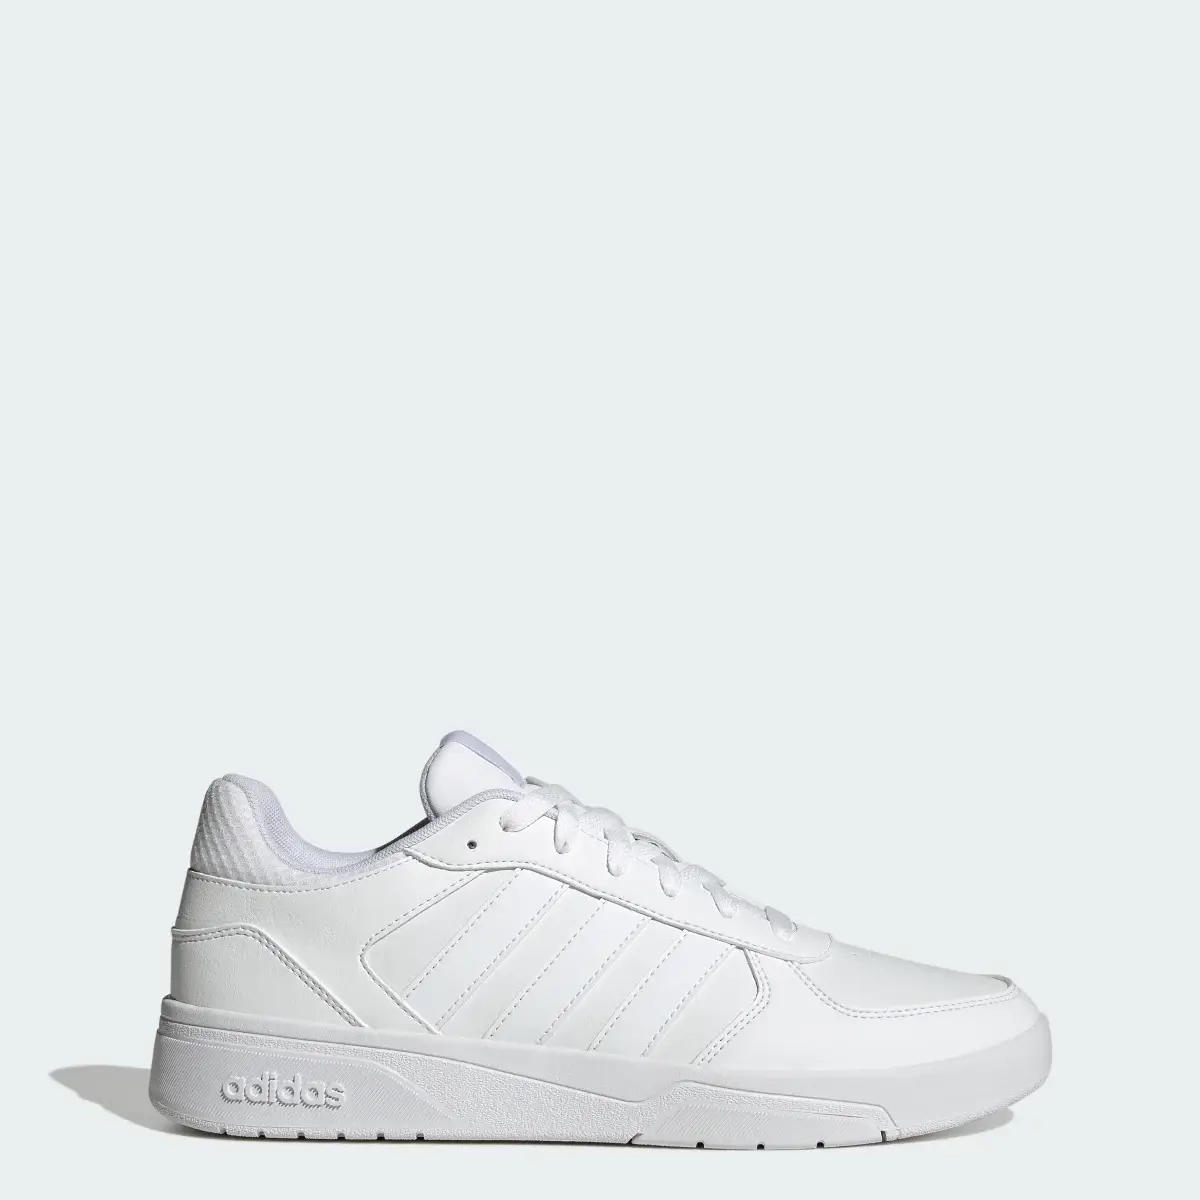 Adidas Chaussure CourtBeat Court Lifestyle. 1